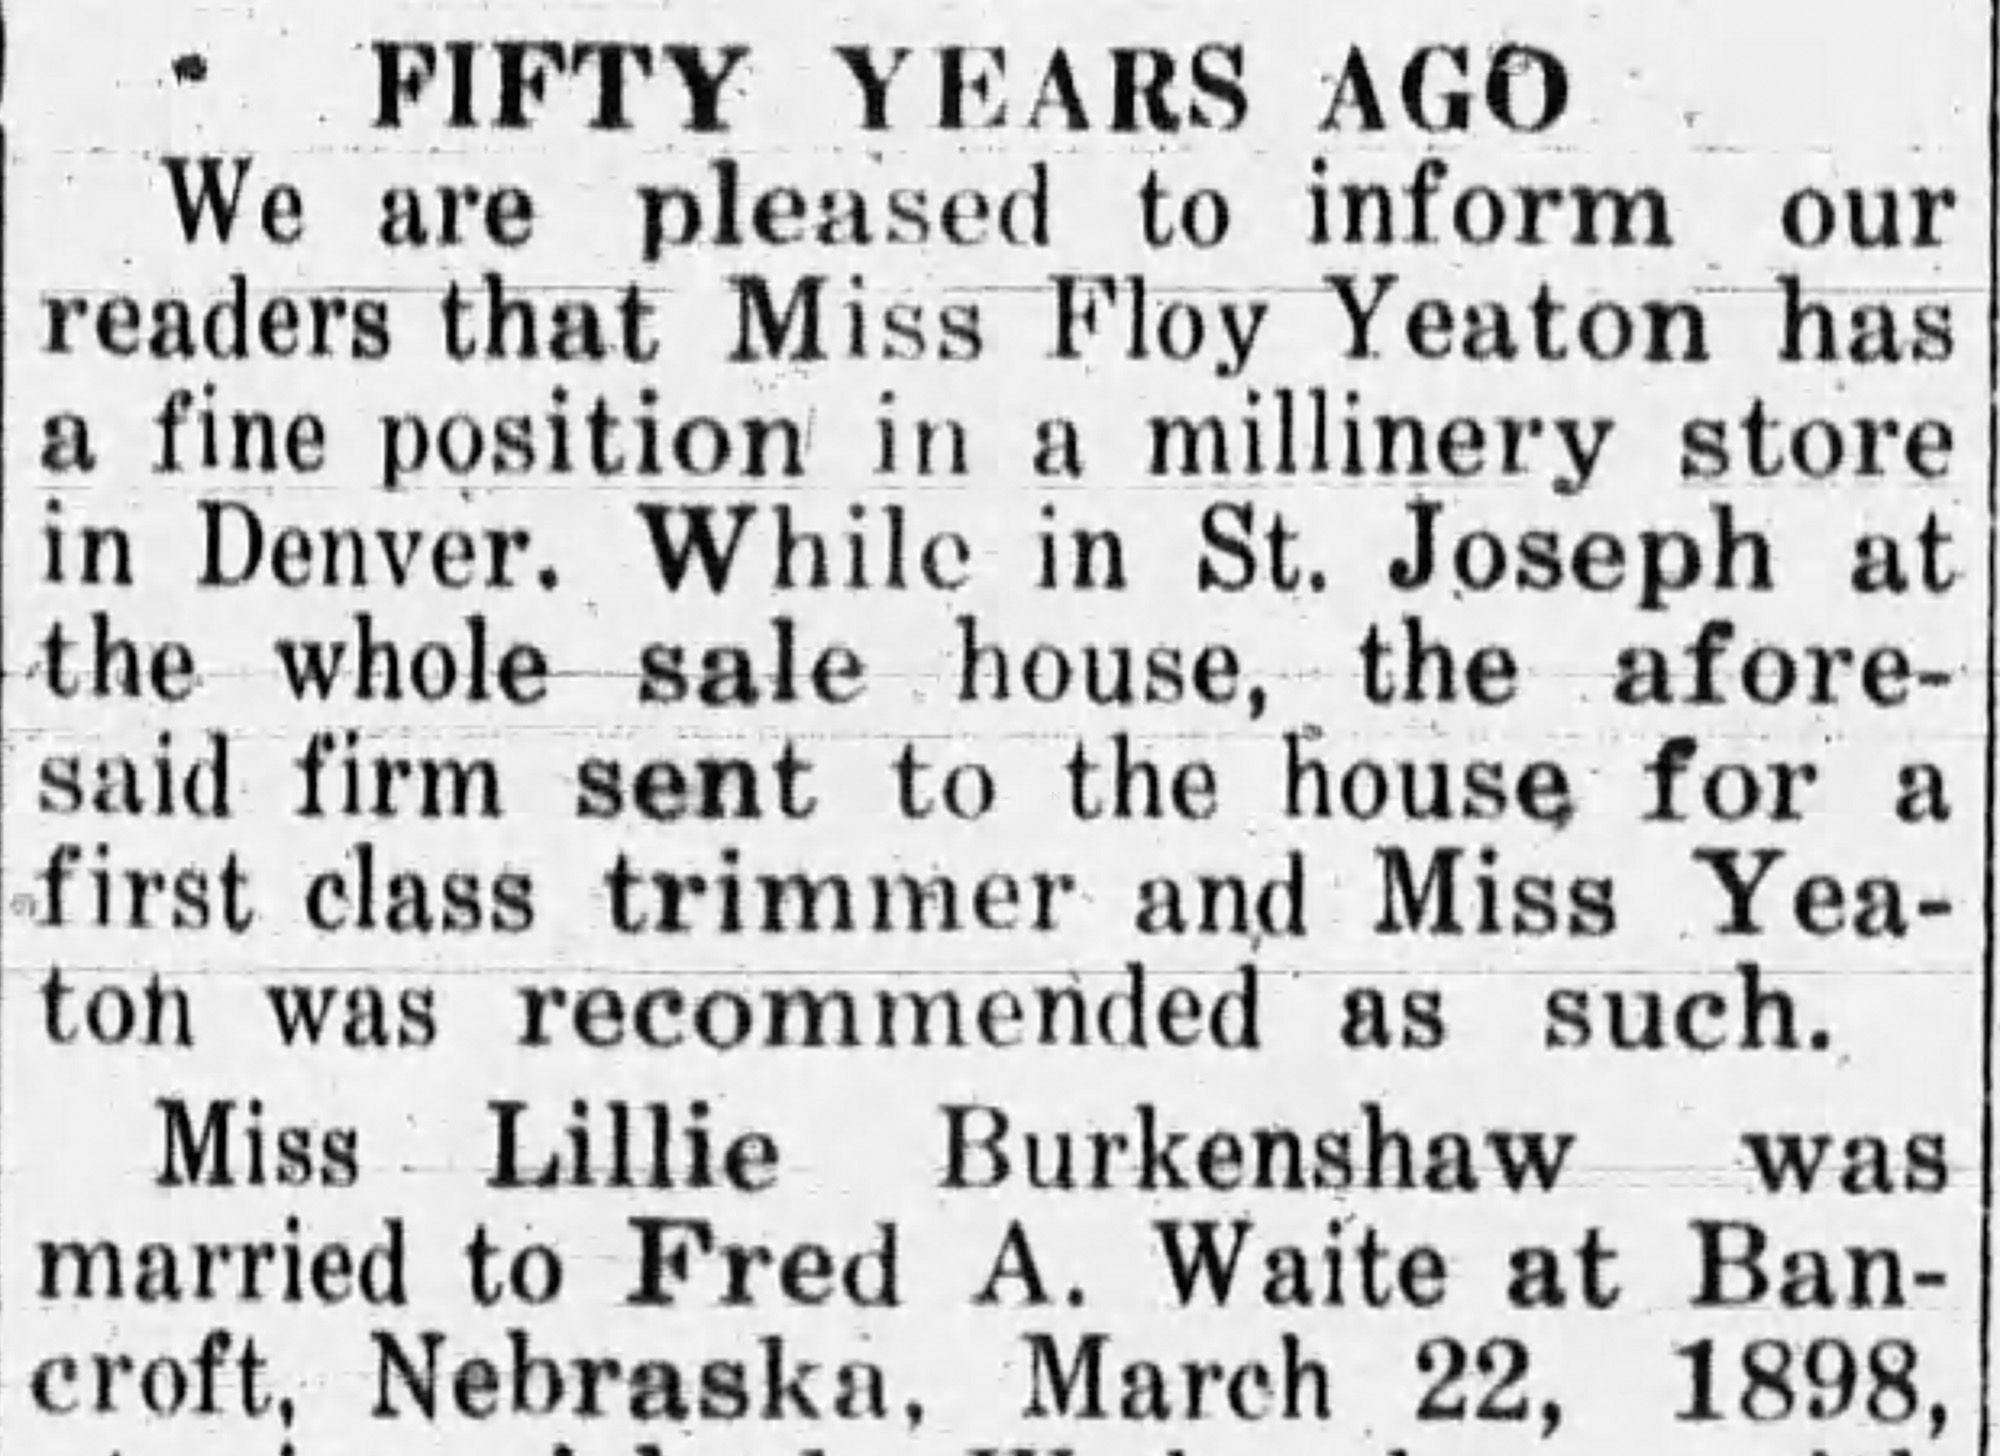 Dauth Family Archive - 1949-03-24 - The Lyons Mirror - Florence Yeaton Working at Millinery in Denver